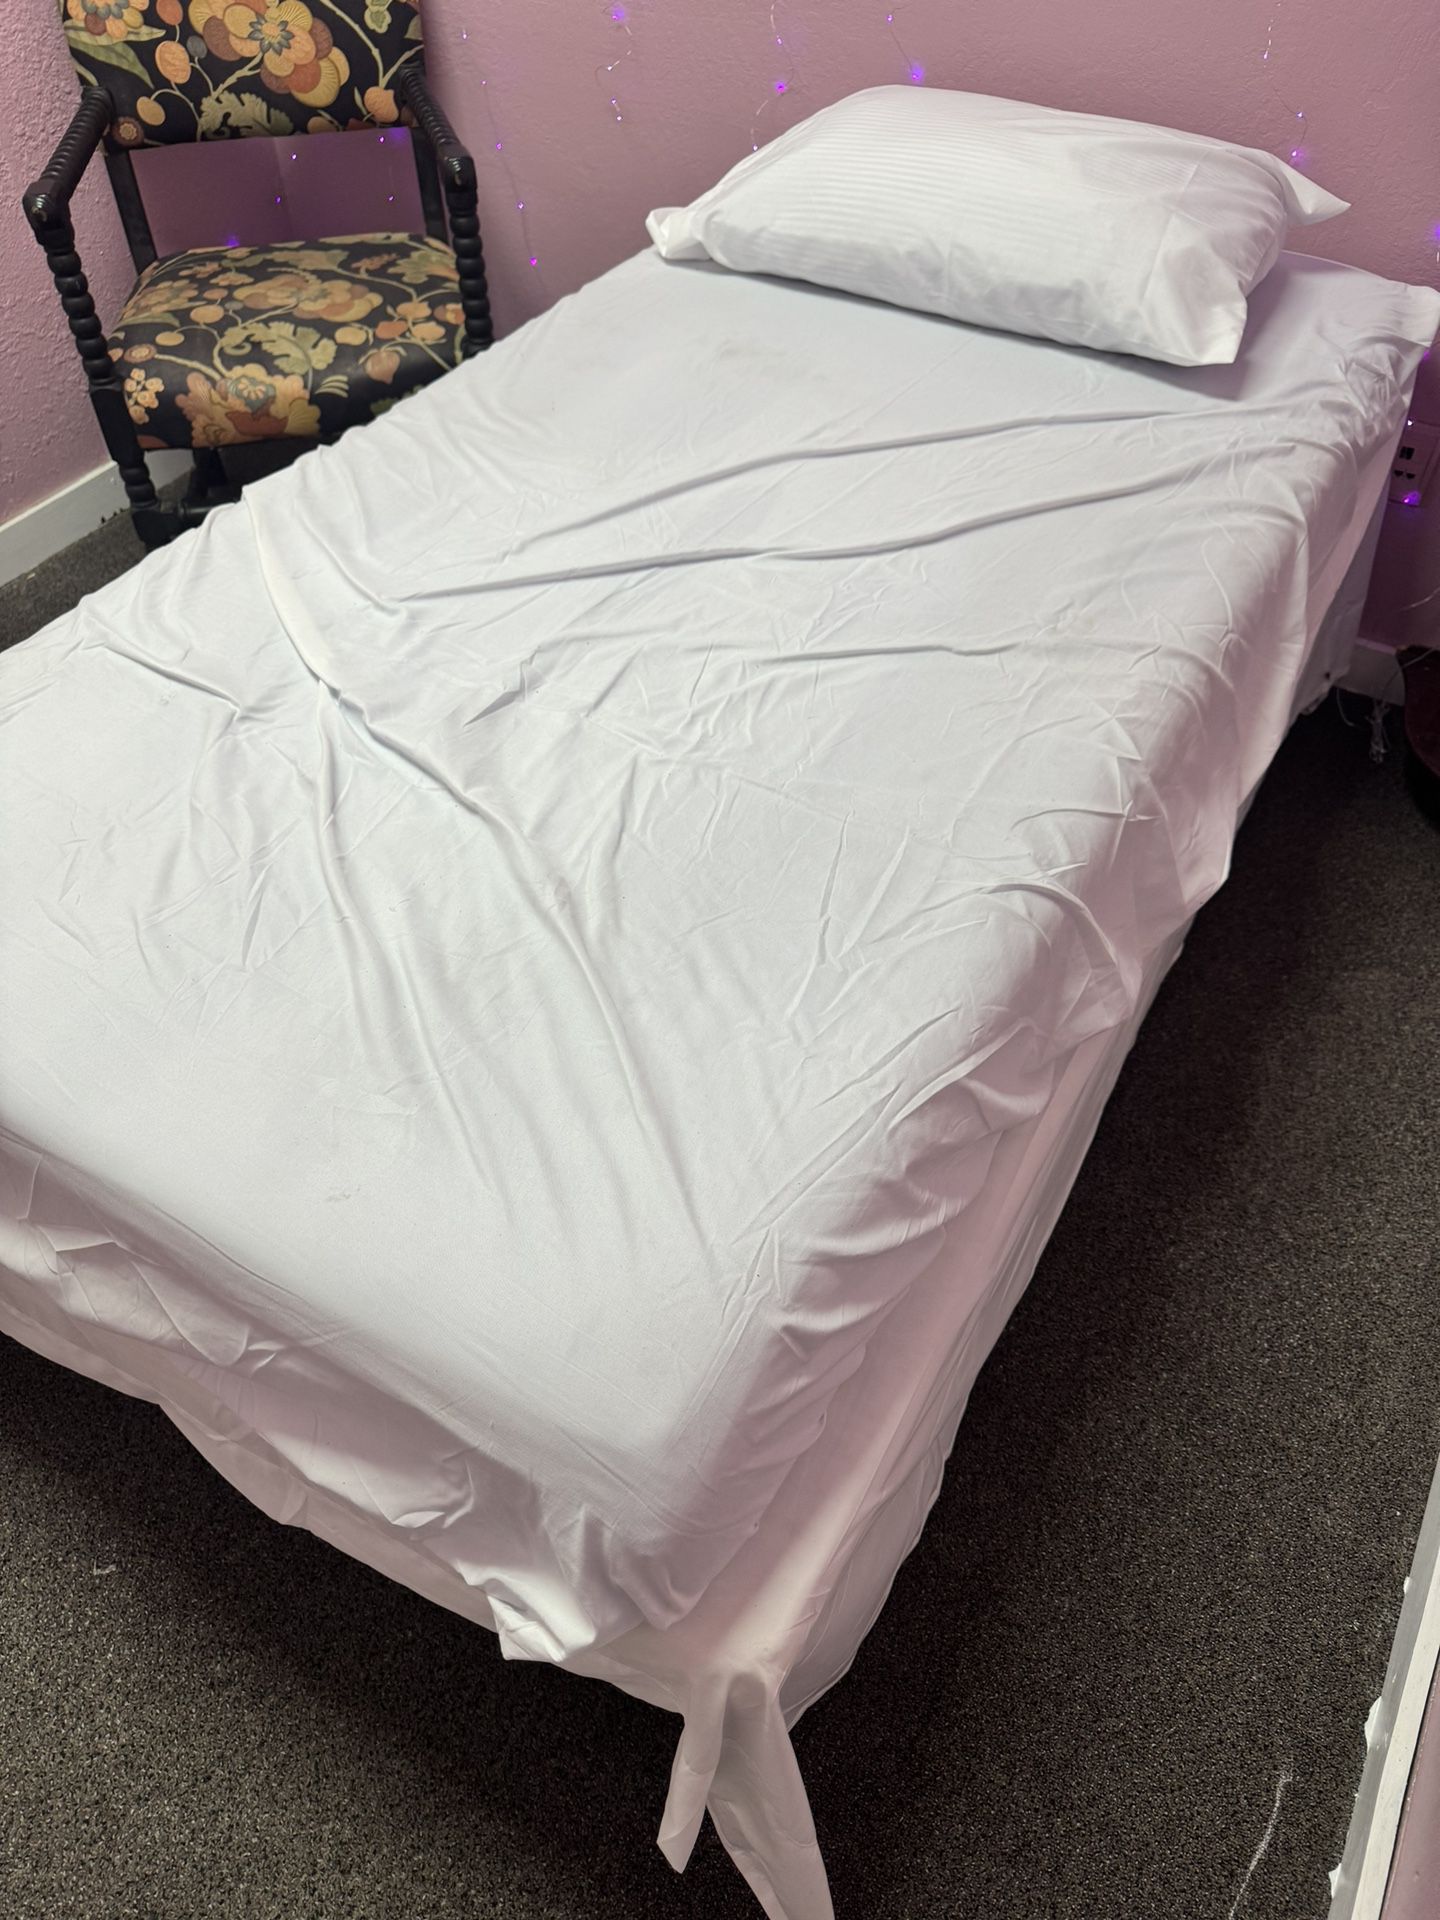 Metal Rolling Frame twin Bed With Box spring And Mattress